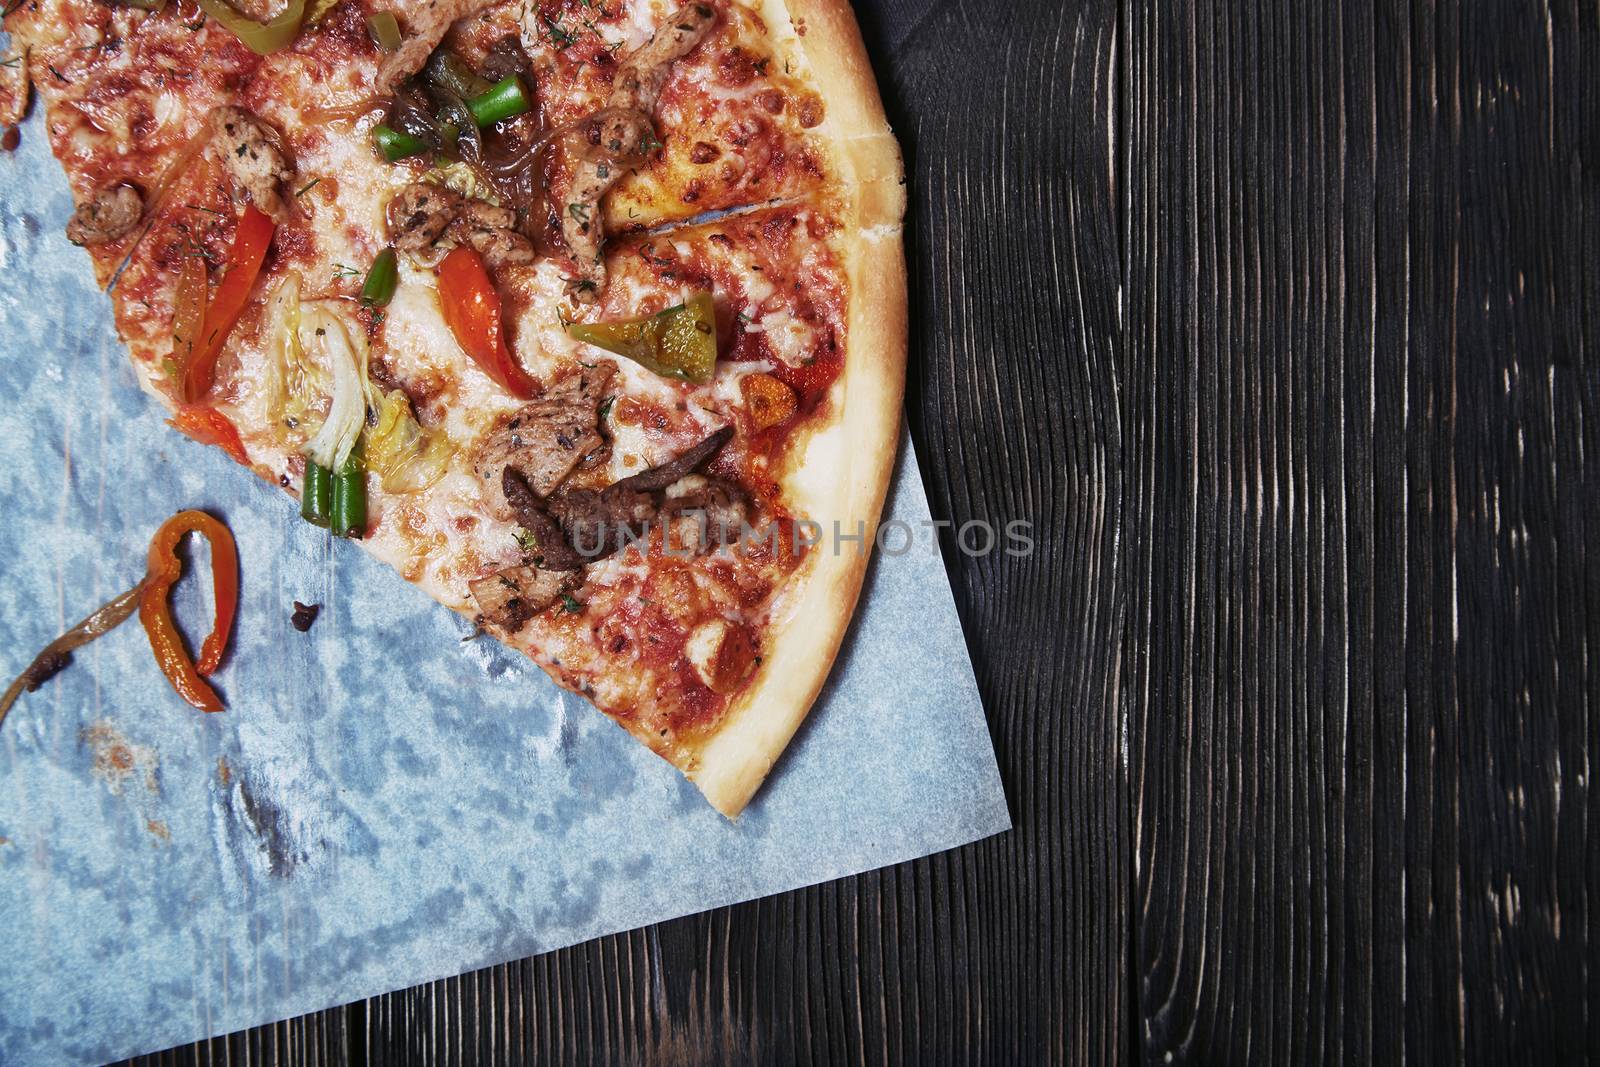 Part of homemade pizza on a wooden table